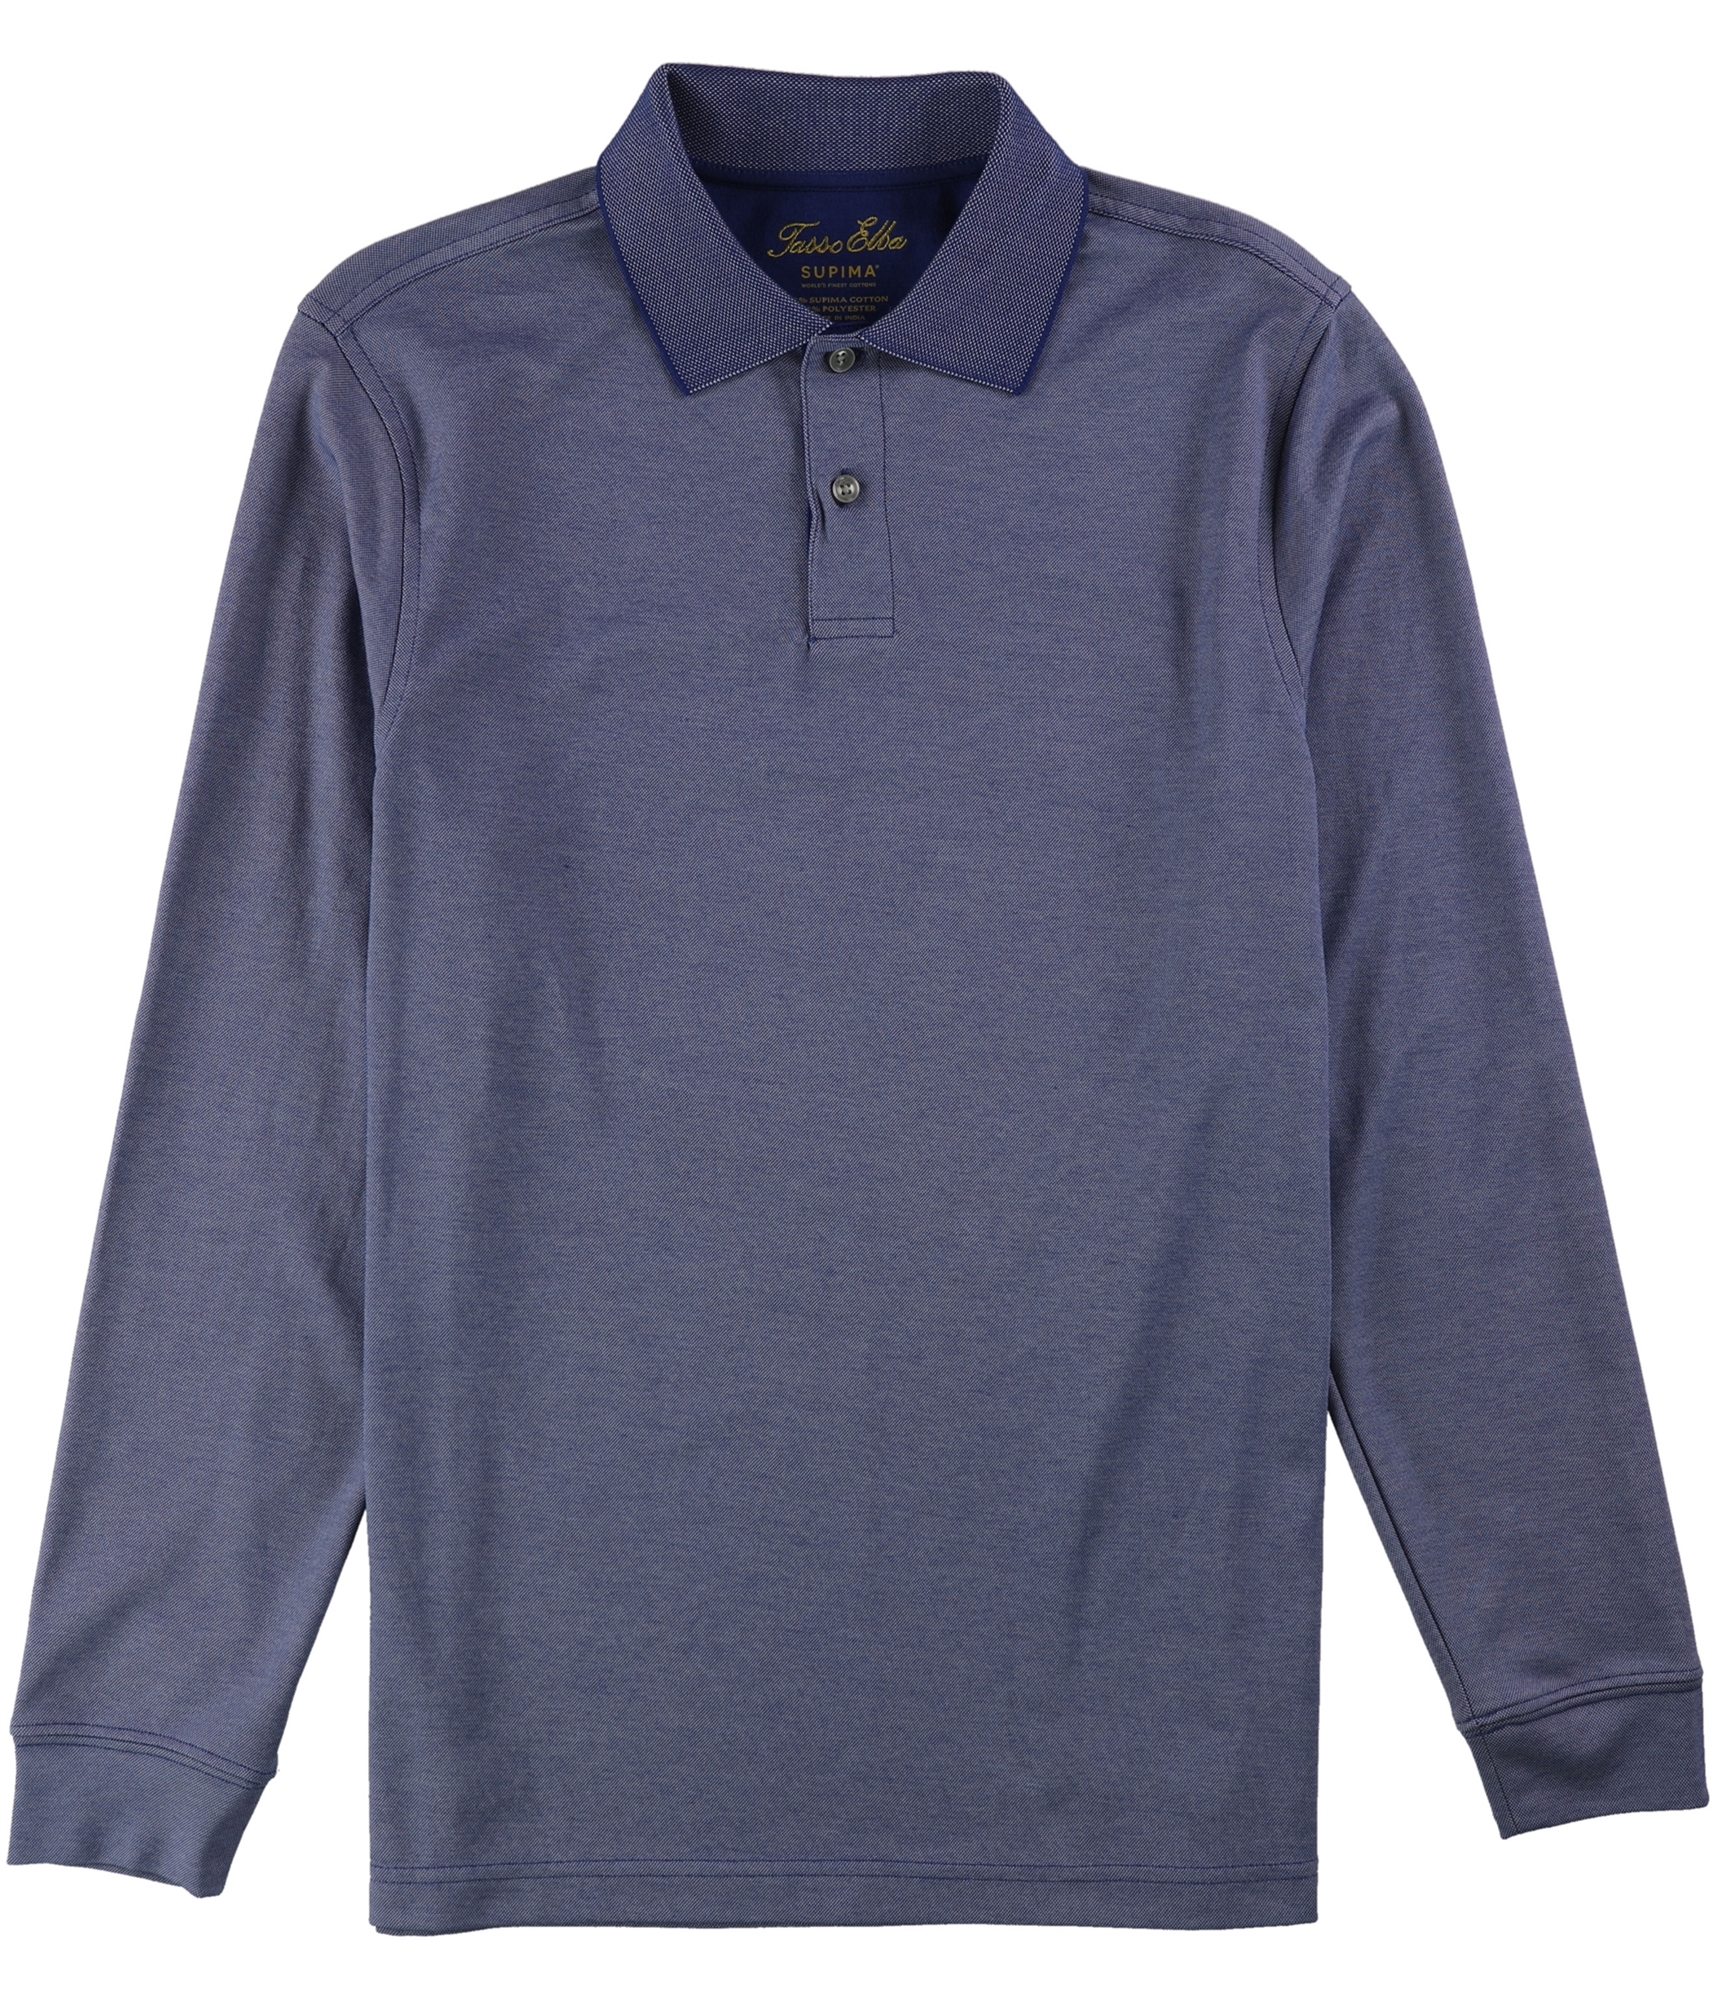 Buy a Tasso Elba Mens Ls Rugby Polo Shirt, TW3 | Tagsweekly